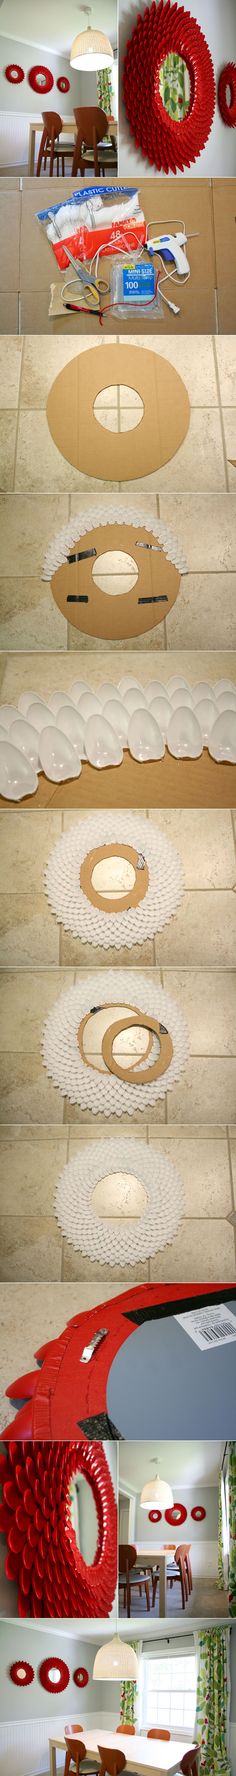 That&#39;s a LOT of spoons! DIY Decorative Chrysanthemum Mirror with Plastic Spoons